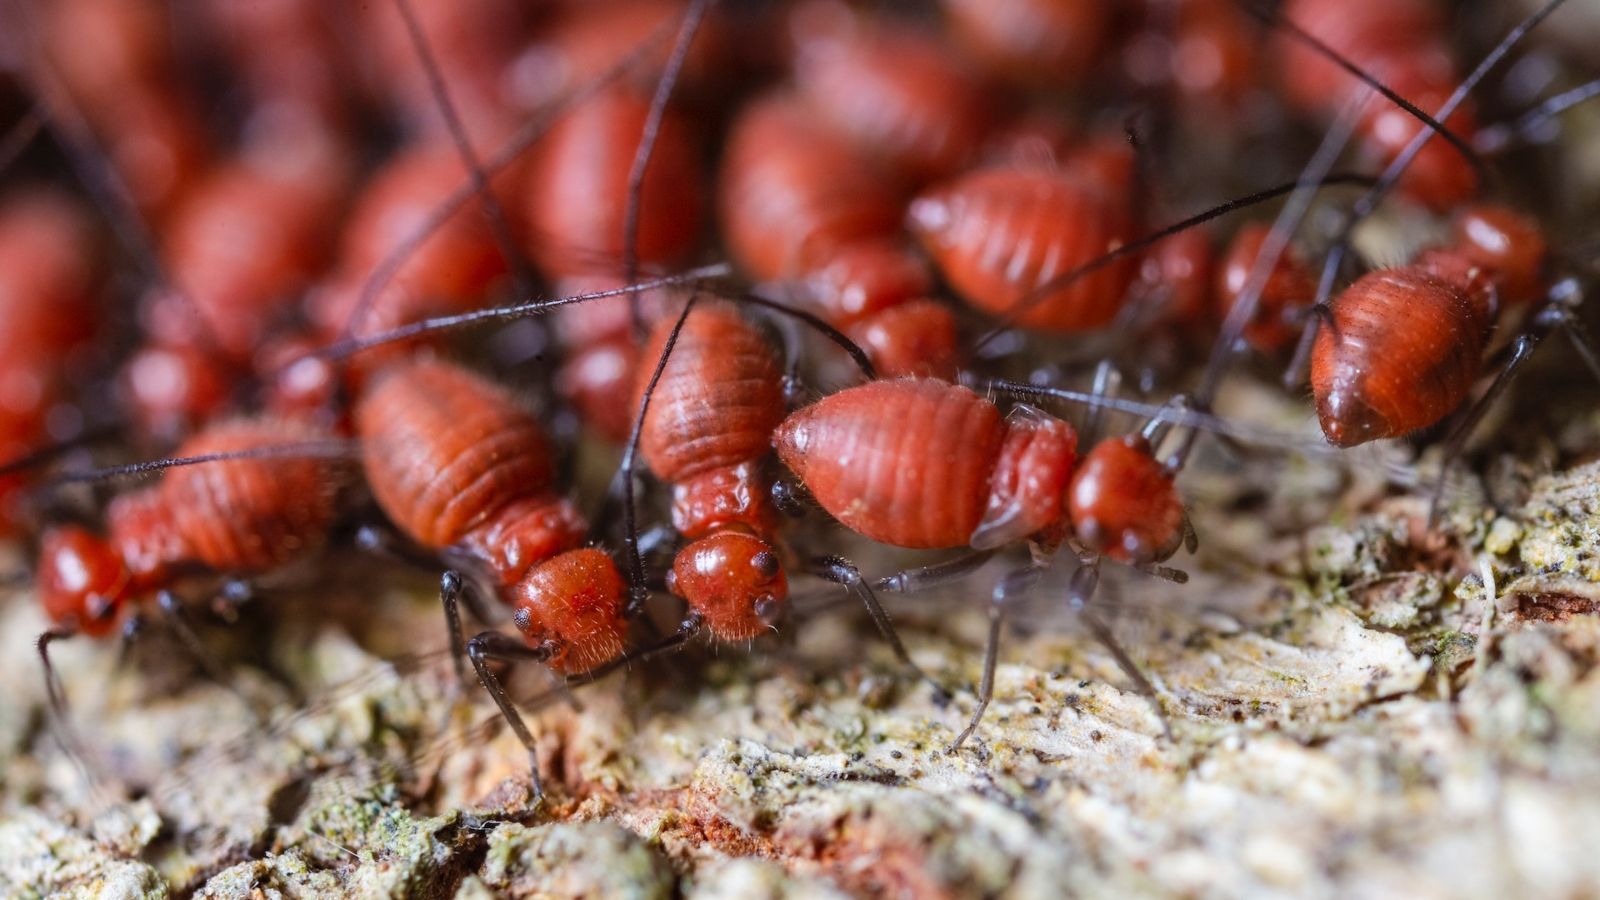 Termites make up 40% of the mass of underground arthropods. Photo by Jimmy Chan on Pexels.com